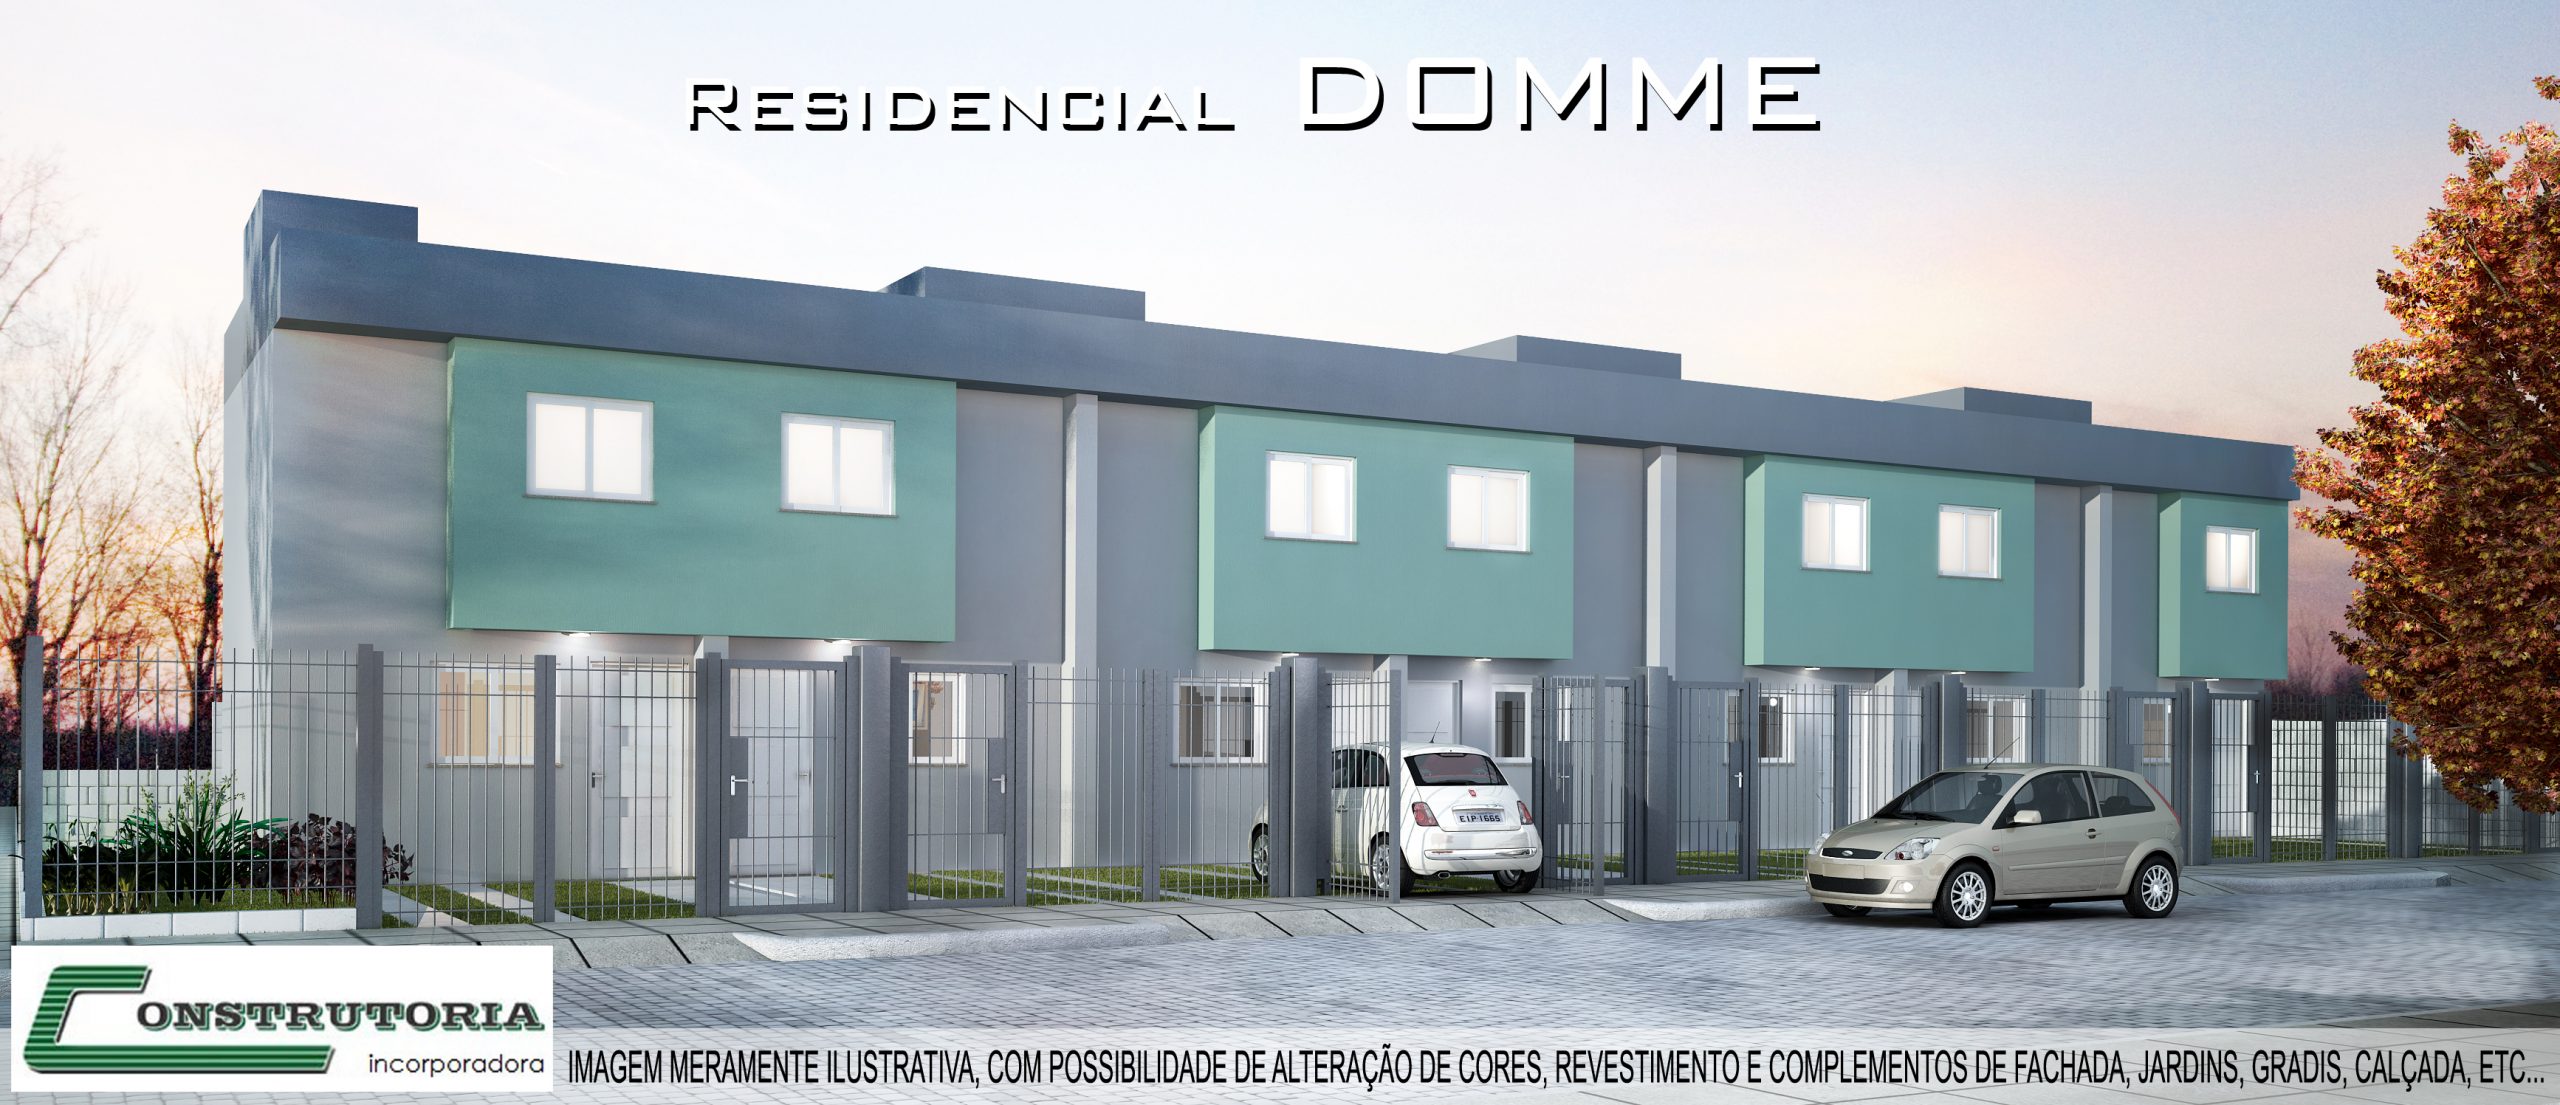 Residencial Domme